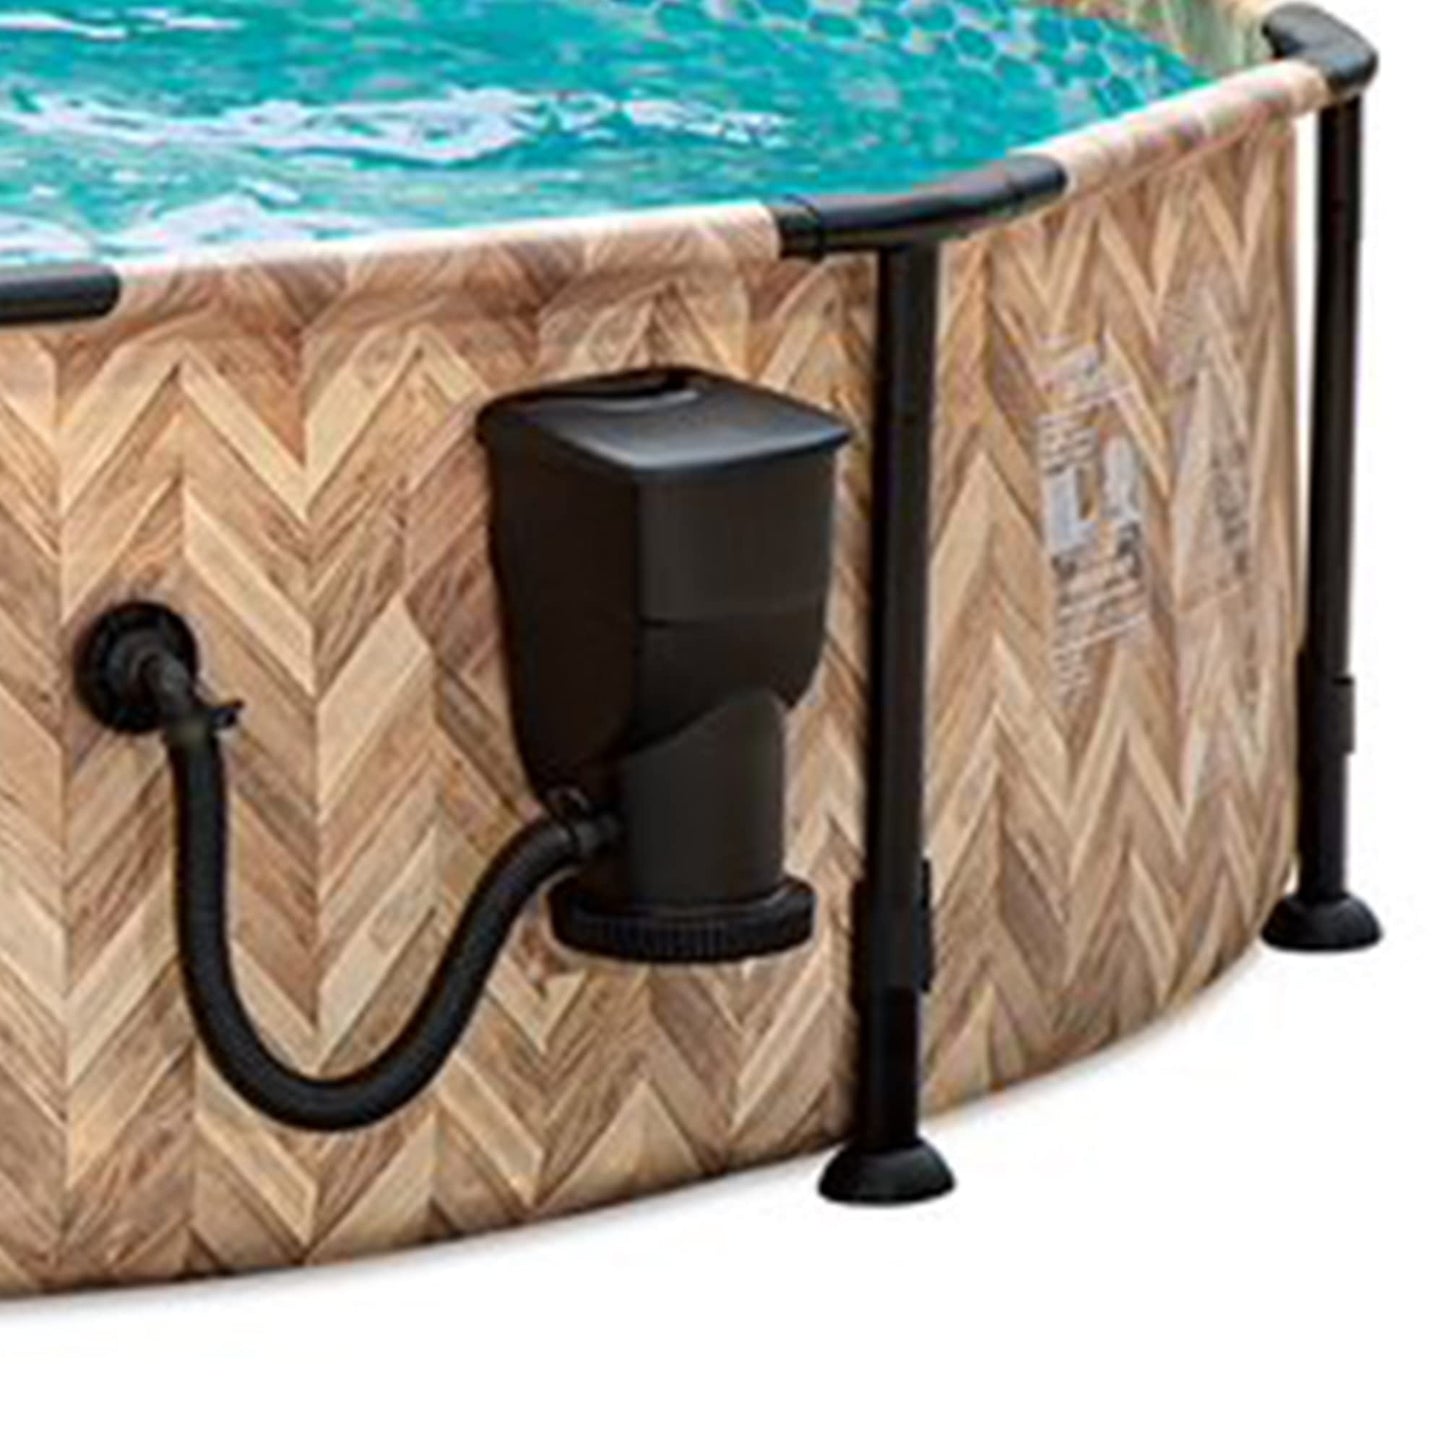 Summer Waves Oak Herringbone Elite 12' x 30" Outdoor Backyard Round Frame Above Ground Swimming Pool Set with Filter Pump, Cartridge, and Repair Patch